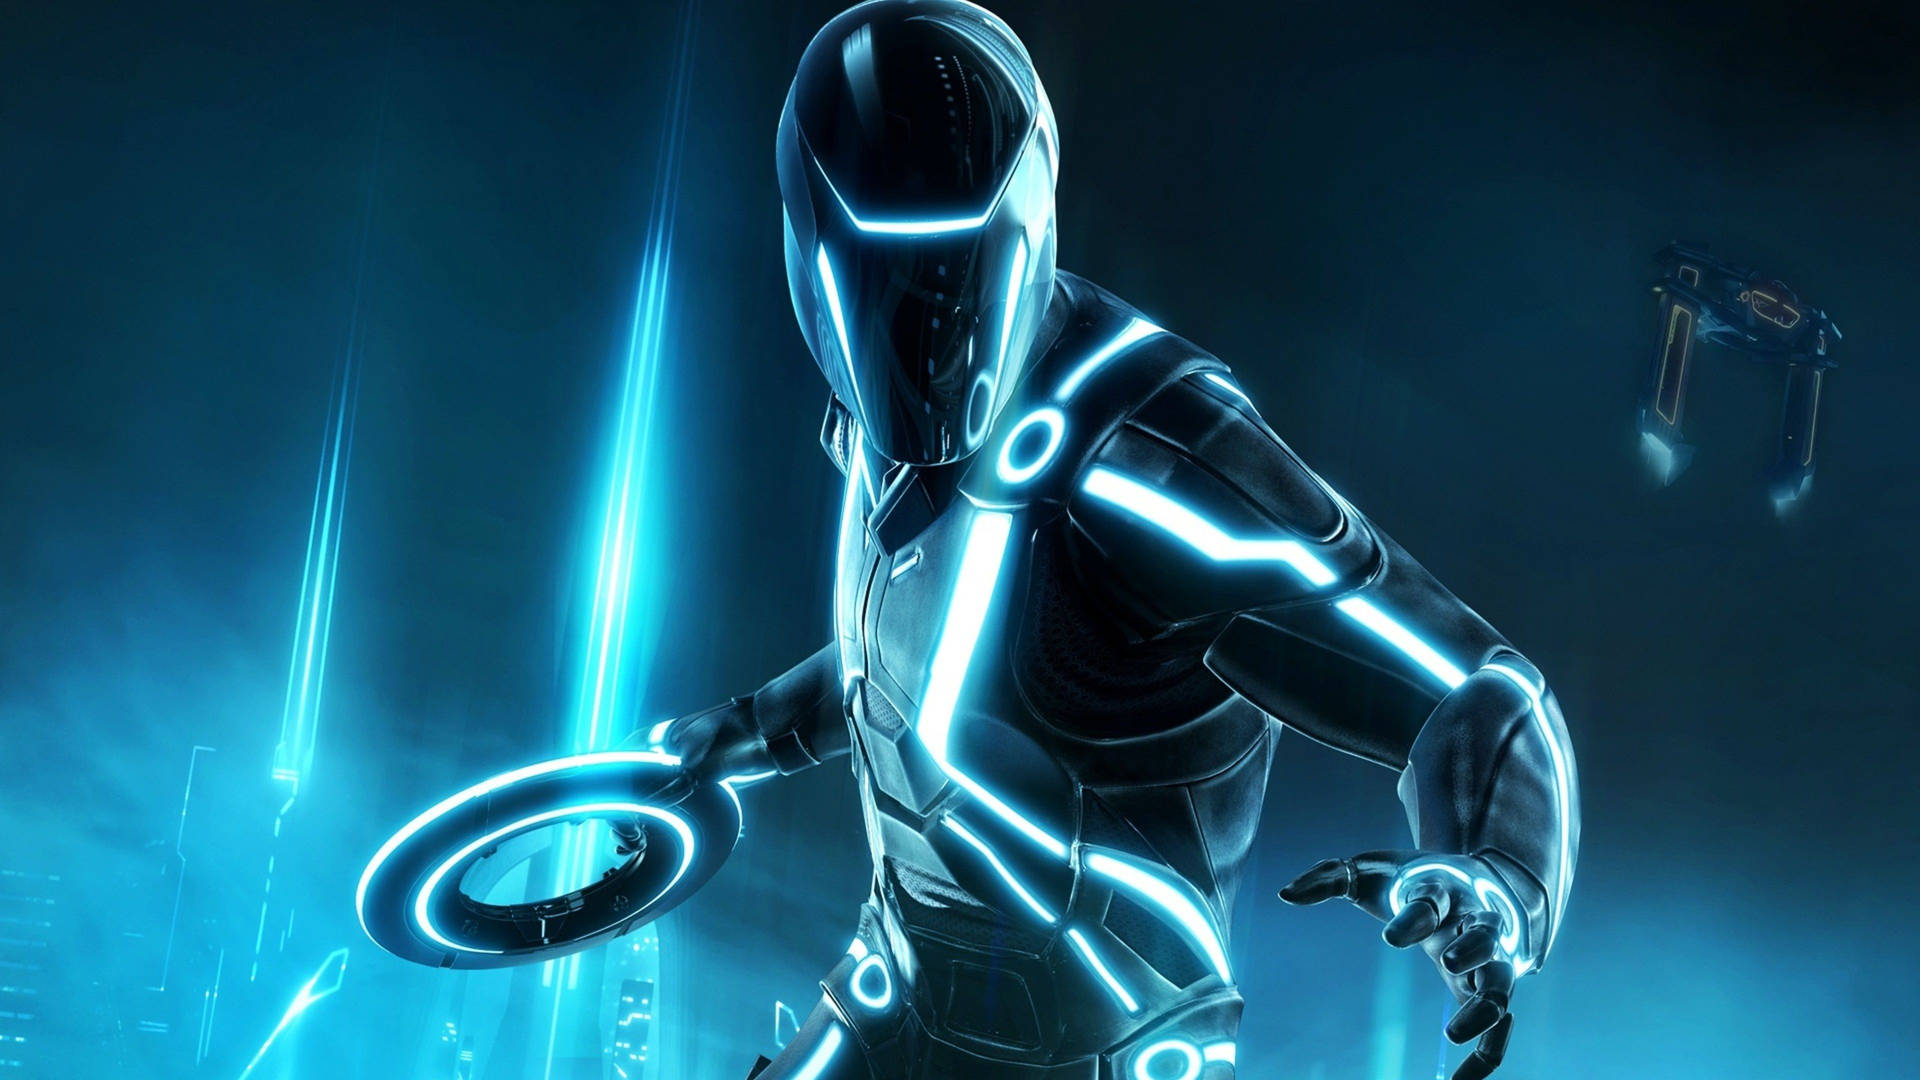 Get Ready To Take On The Grid In Tron Wallpaper